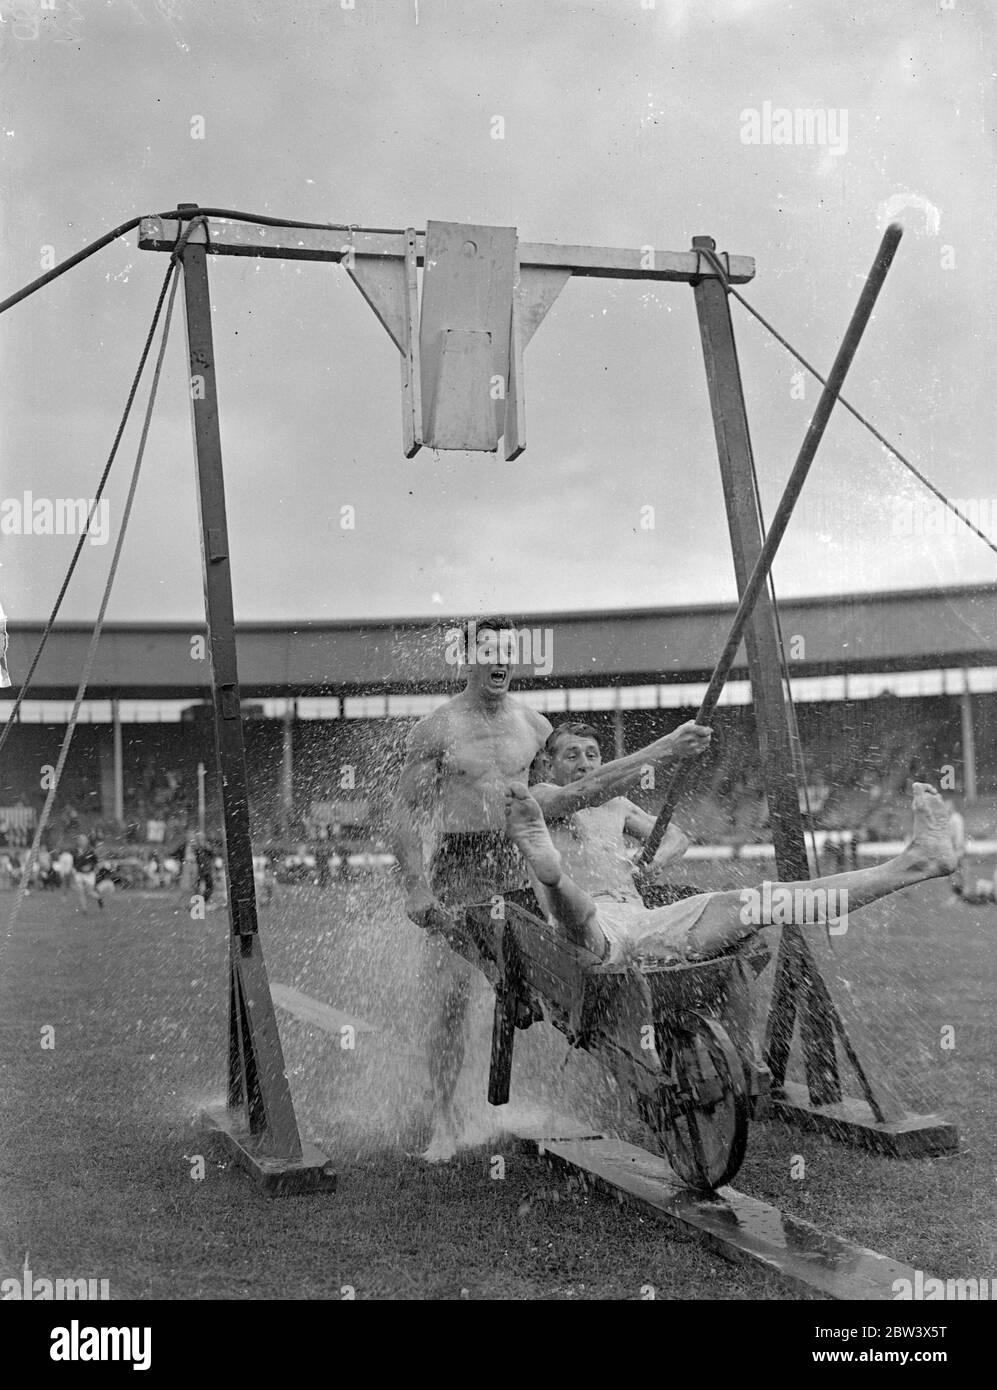 Tilting the bucket at firemen ' sport . The thirty fourth annual athletic meeting of the London Fire Brigade Athletic Association was held at the White City stadium . Photo shows , Mr T S Gibbons of the Southwark ( wheeling barrow ) and Mr G S Rudeun of Whitefriars competing in the Tilting the bucket event . 22 August 1936 Original caption from negative Stock Photo